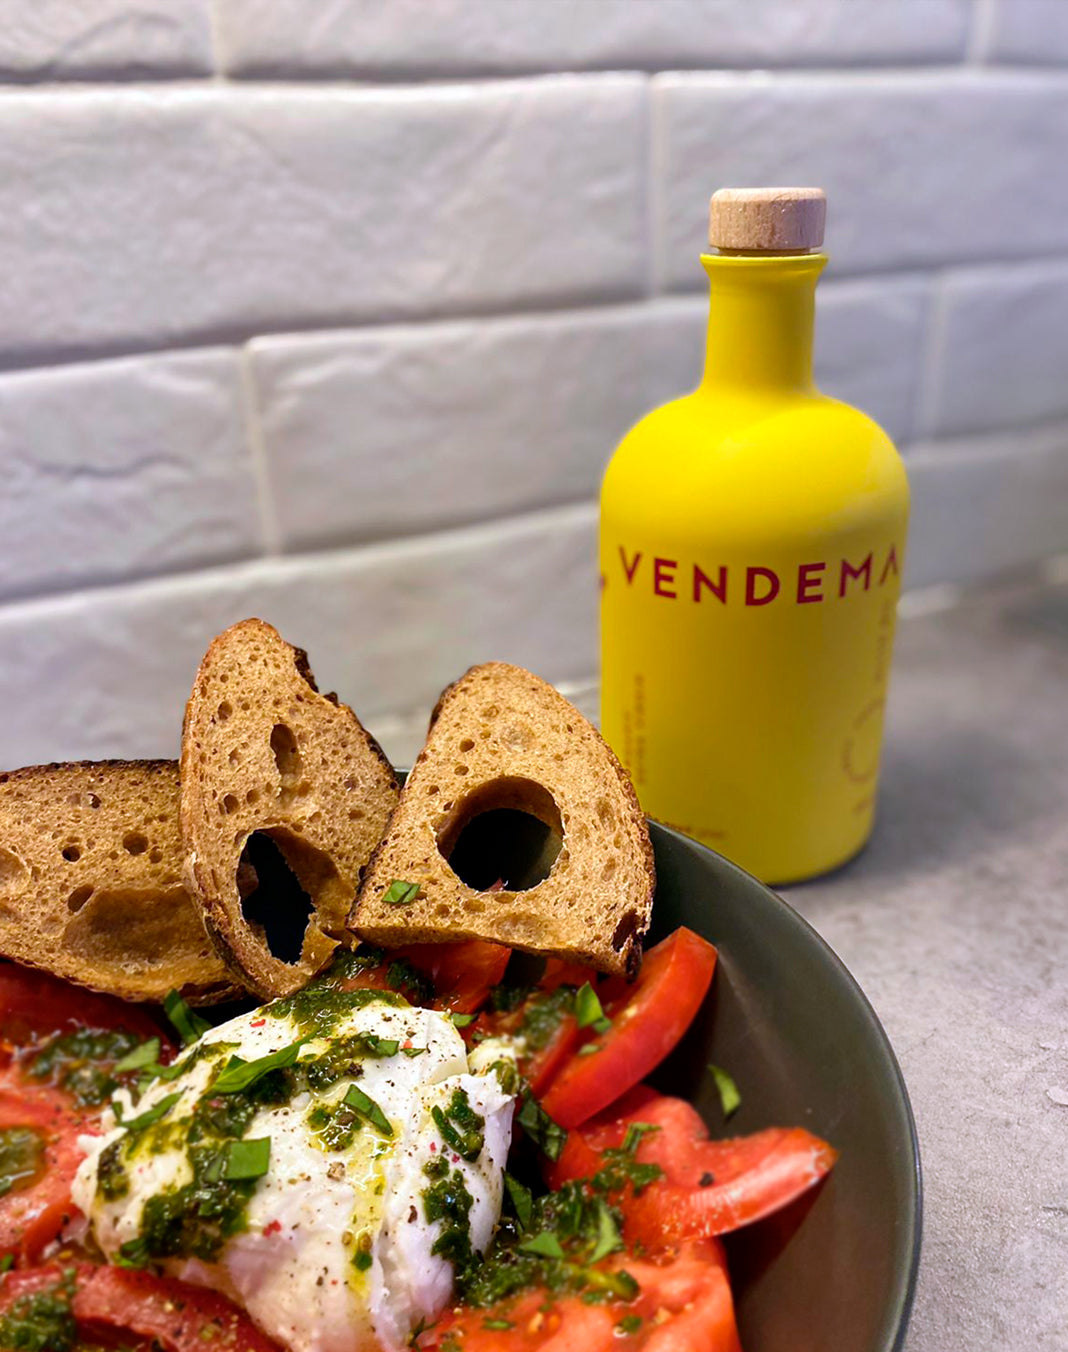 Pair your salad with Vendema Organic Extra Virgin Olive Oil.